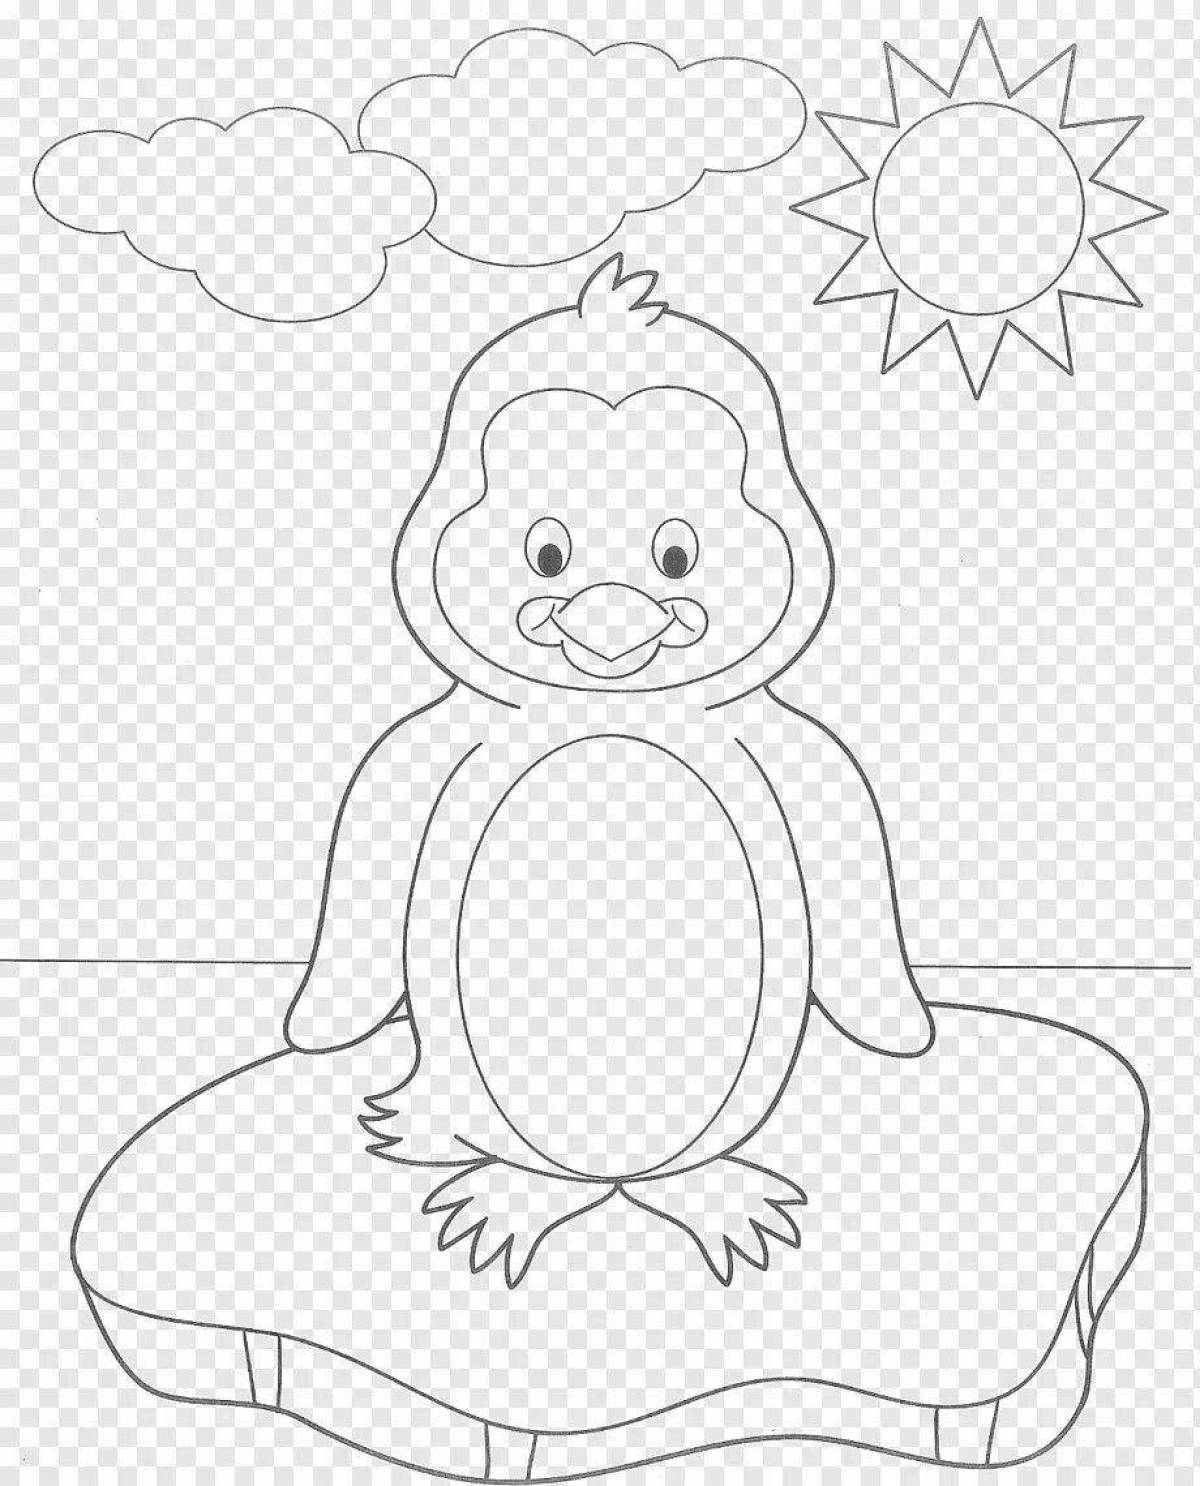 Adorable penguin on an ice floe coloring page for kids